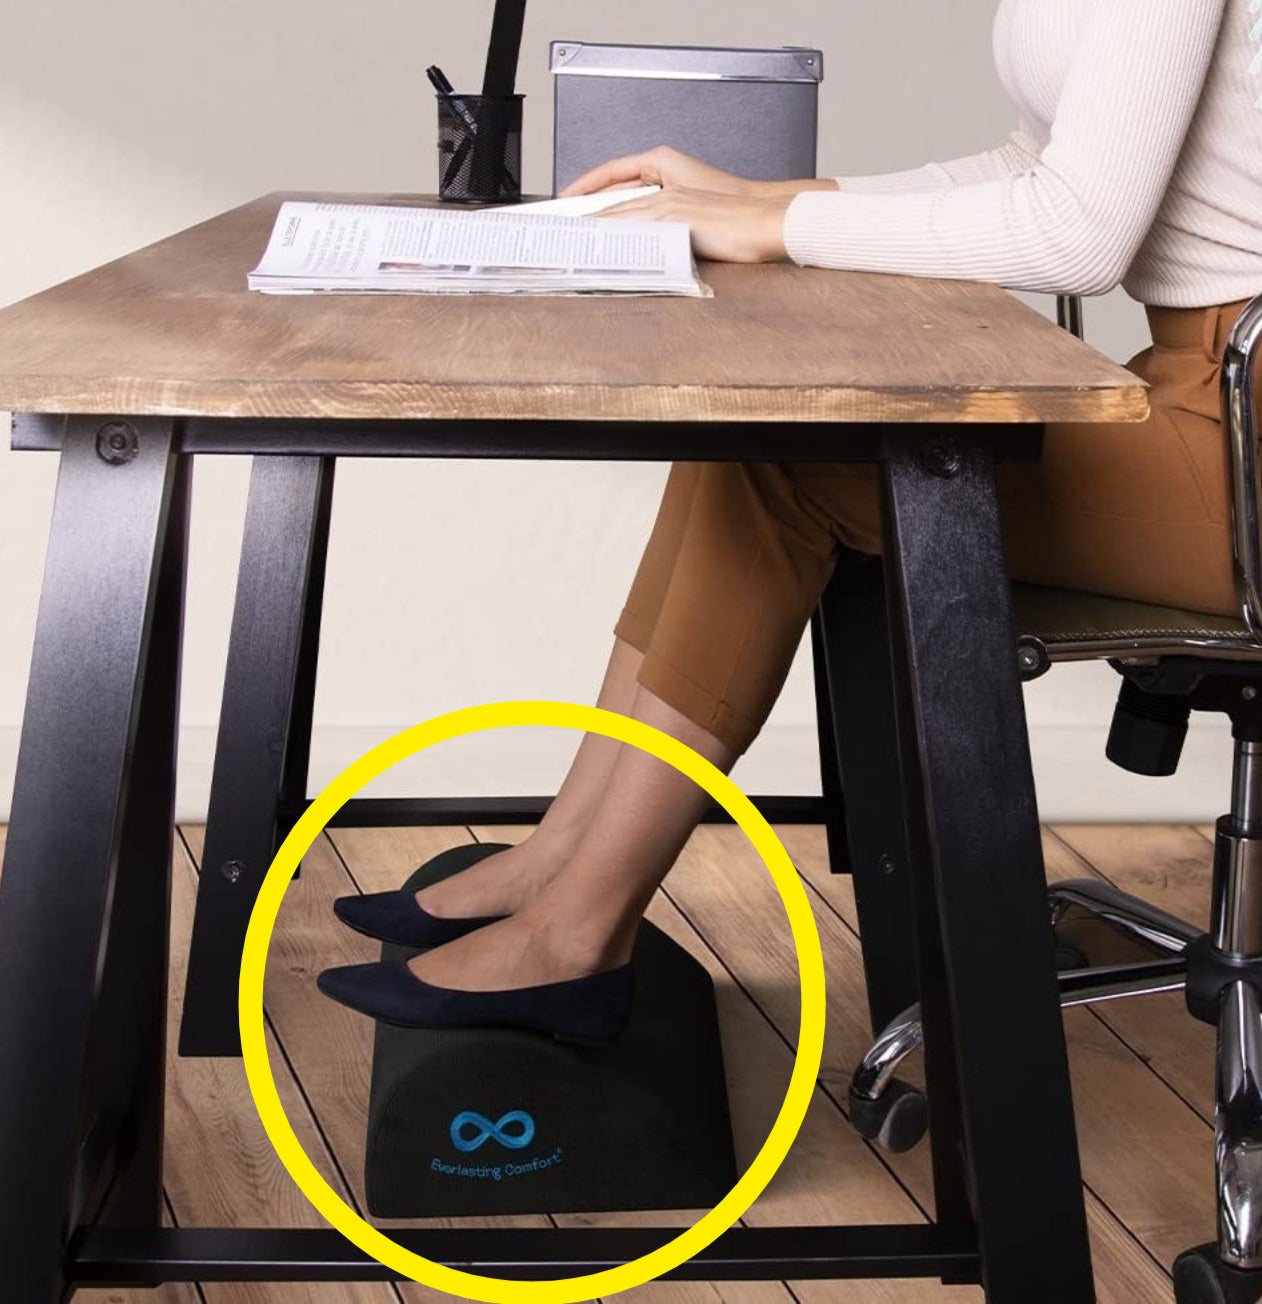 A person sitting at an office desk with their feet rested on the cushion